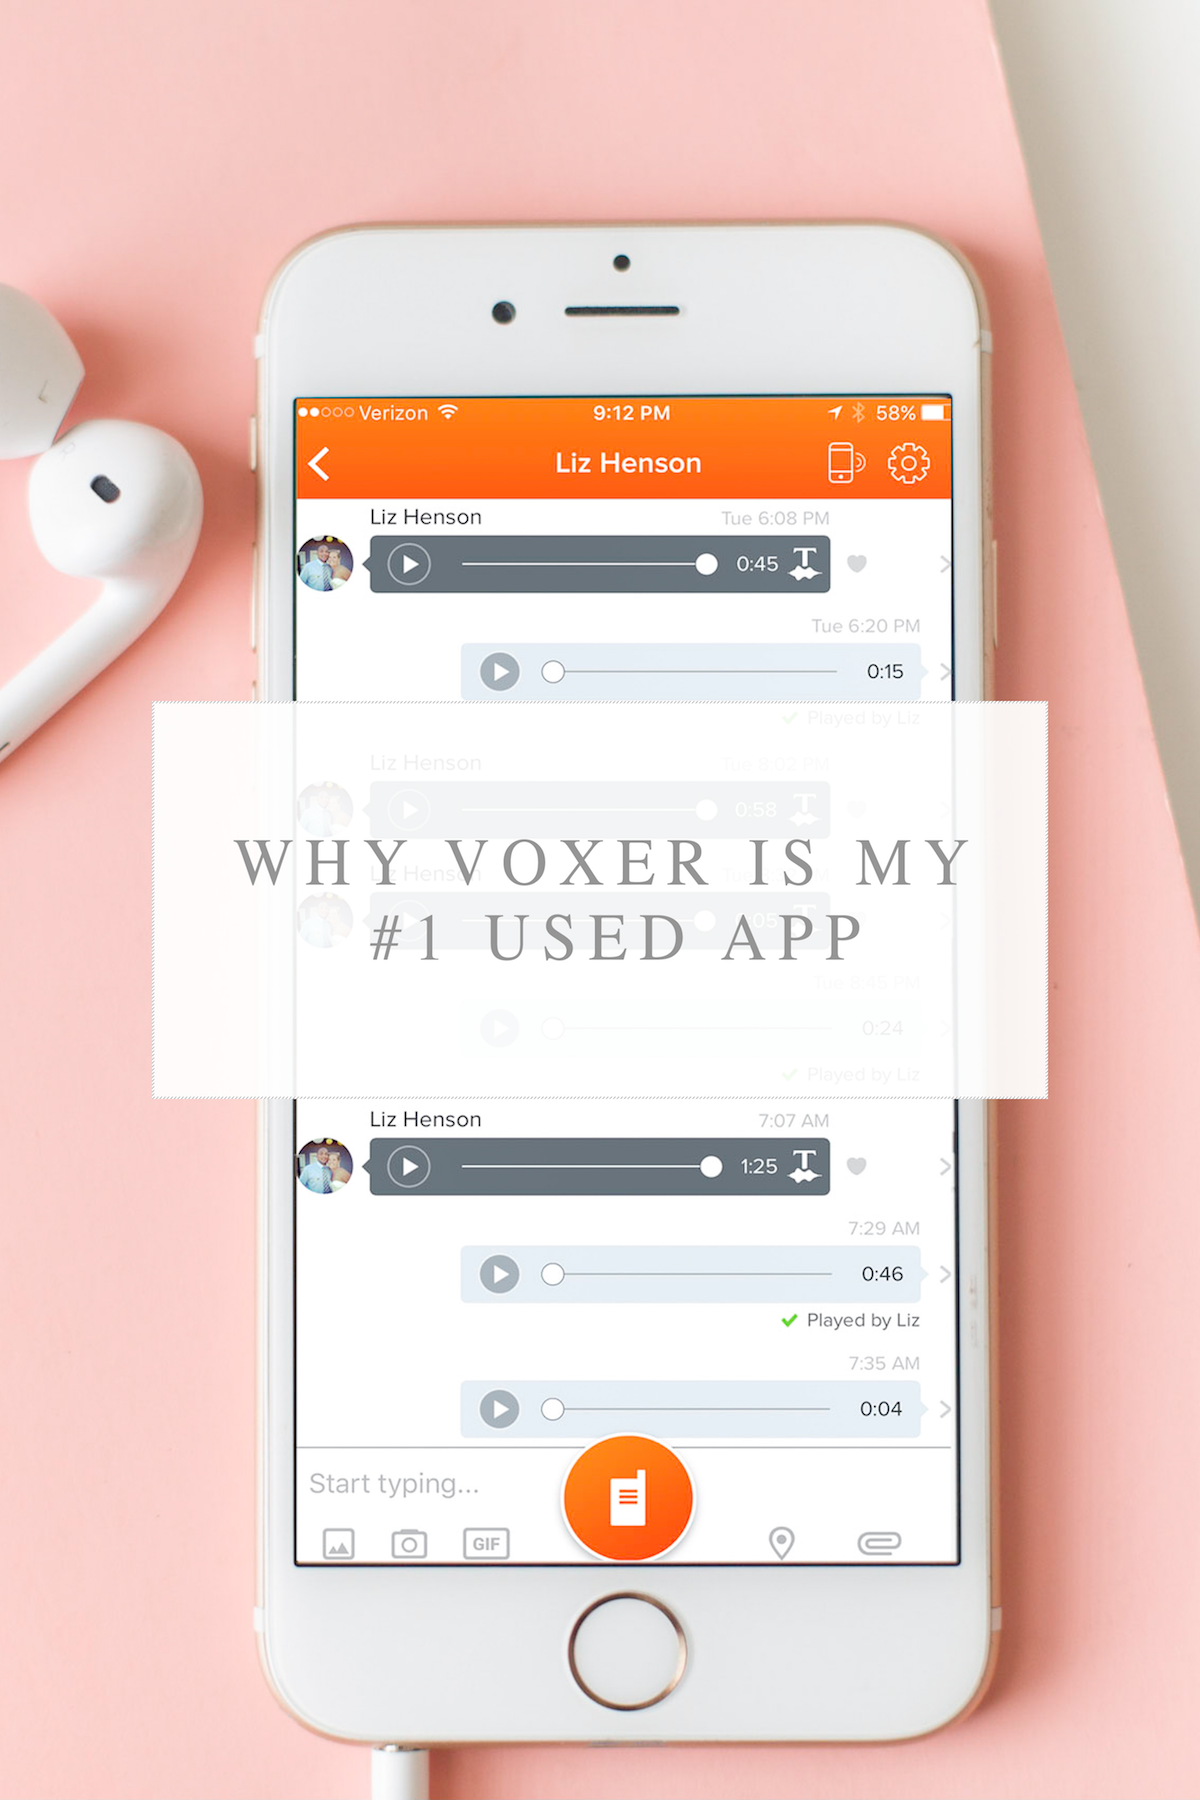 Why Voxer is my #1 Most Used App